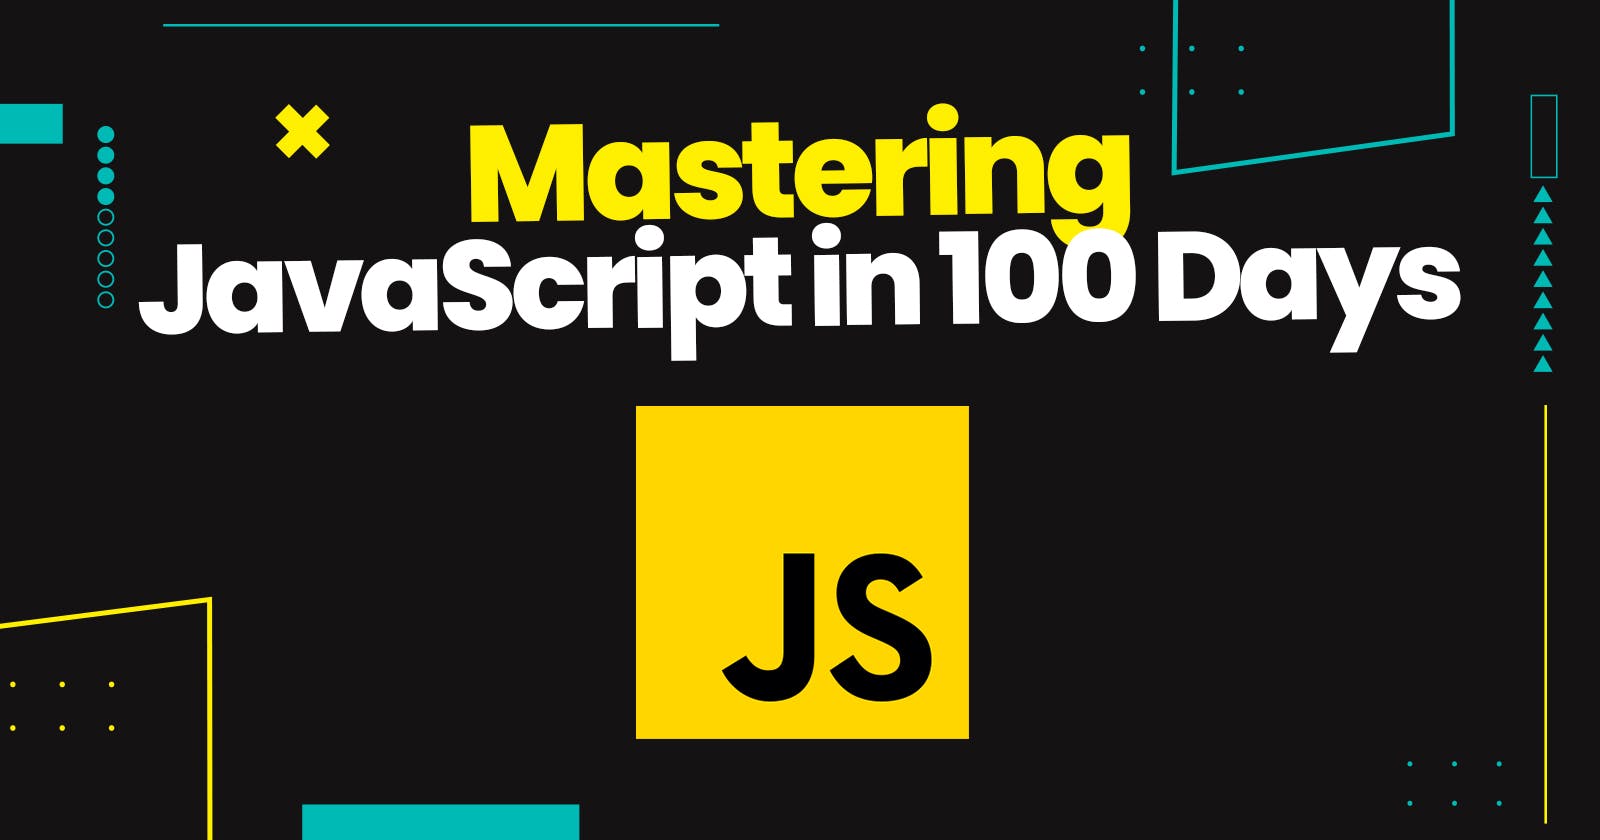 Mastering JavaScript in 100 Days: A Structured Plan for Proficiency